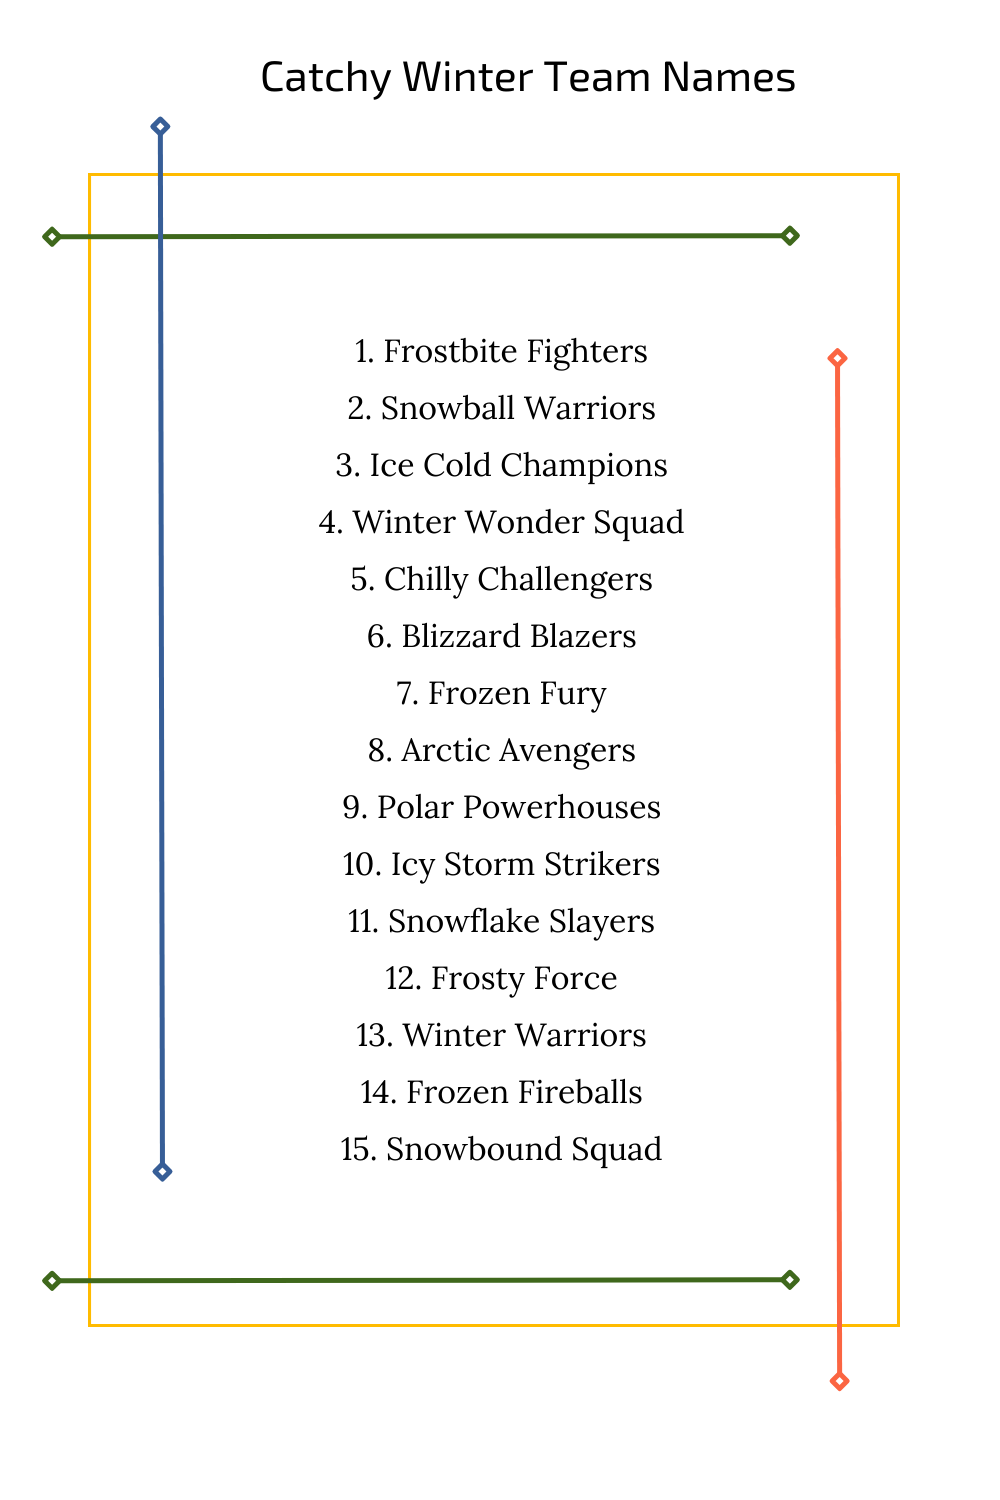 Catchy Winter Team Names